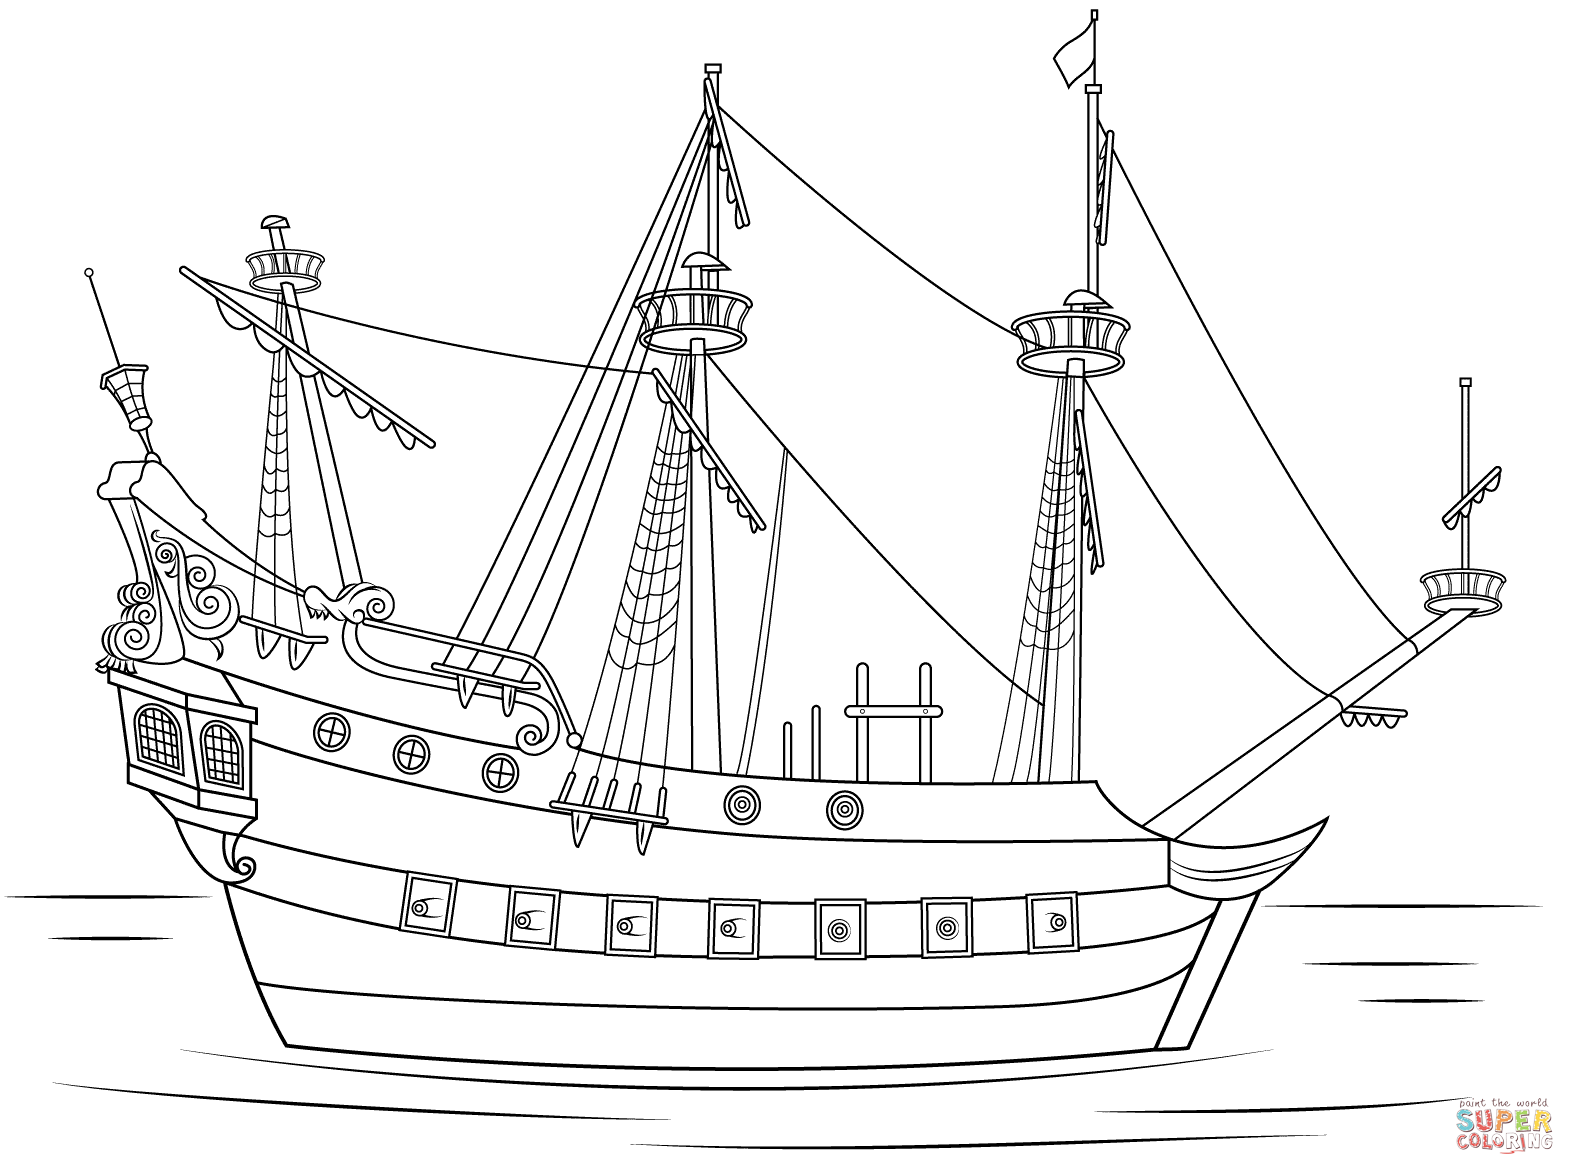 Jake and the Neverland Pirates coloring pages | Free Coloring Pages